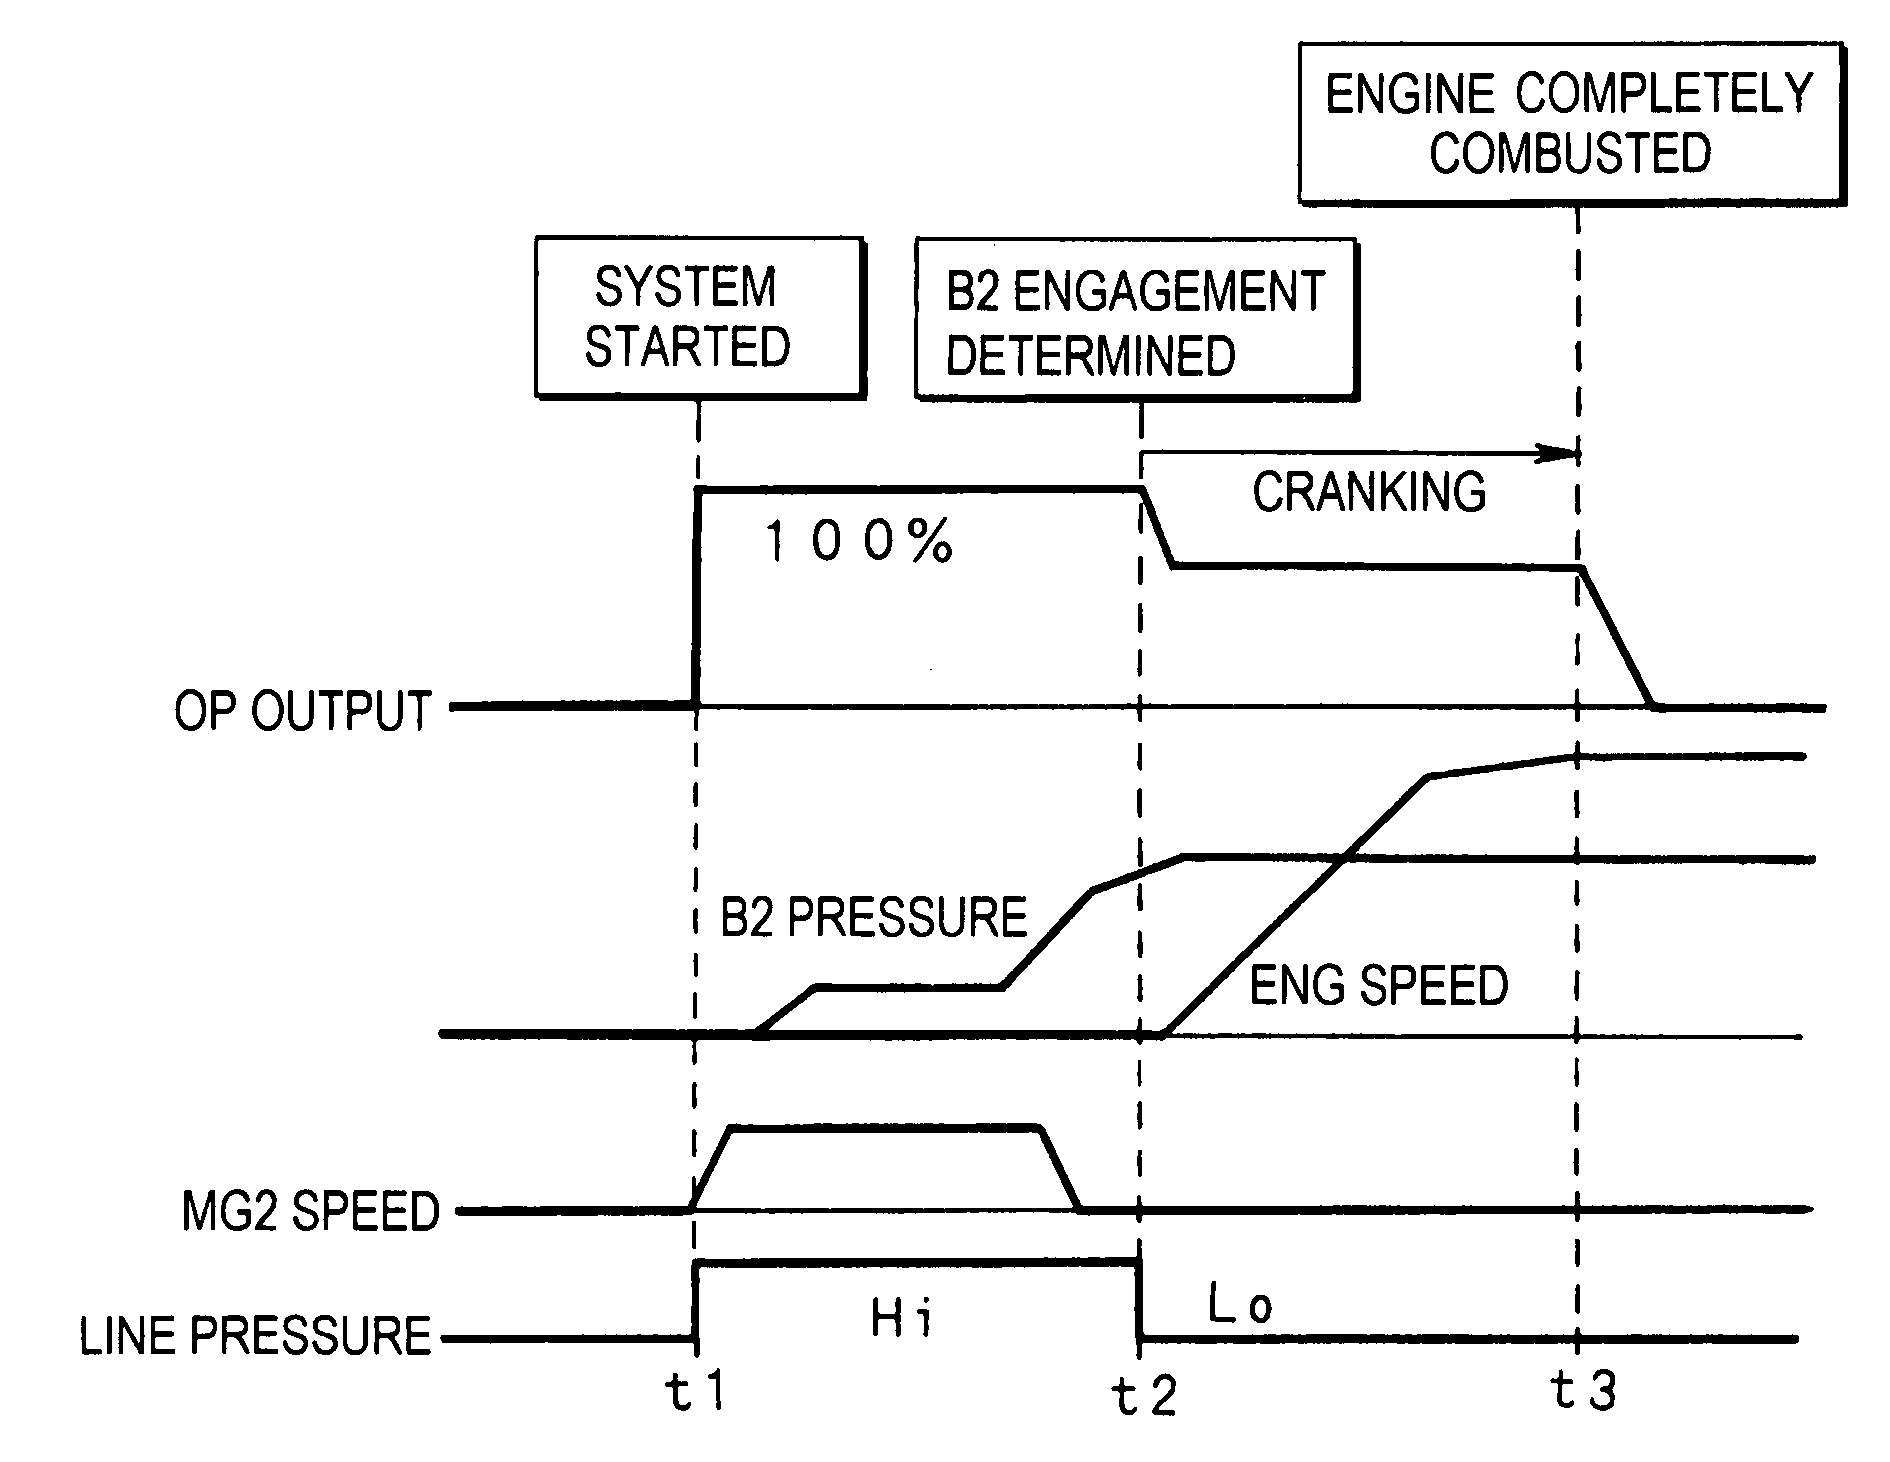 Control system for hybrid vehicles